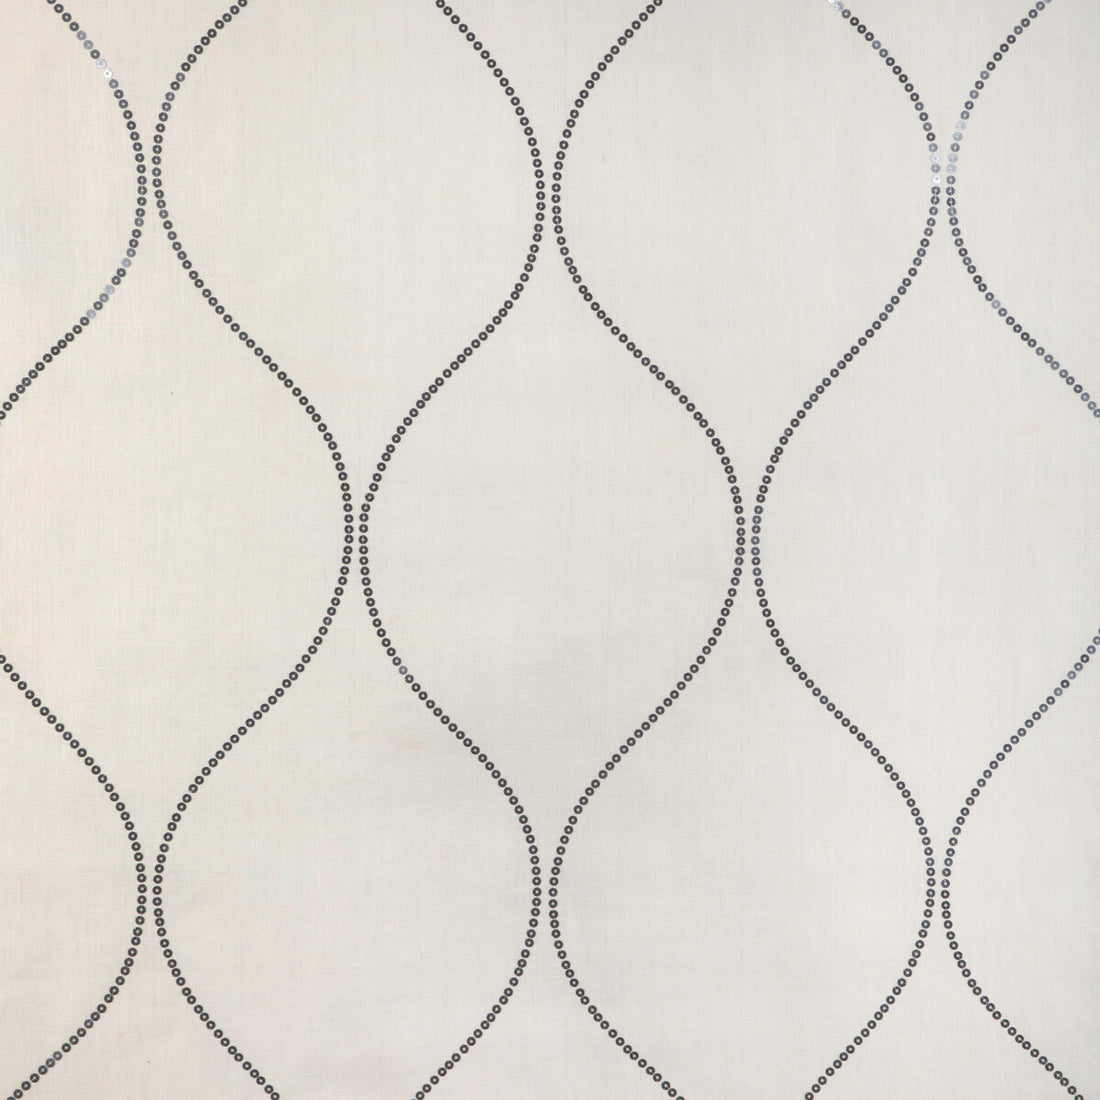 Shimmering Ogee fabric in mica color - pattern 4998.11.0 - by Kravet Design in the Candice Olson collection